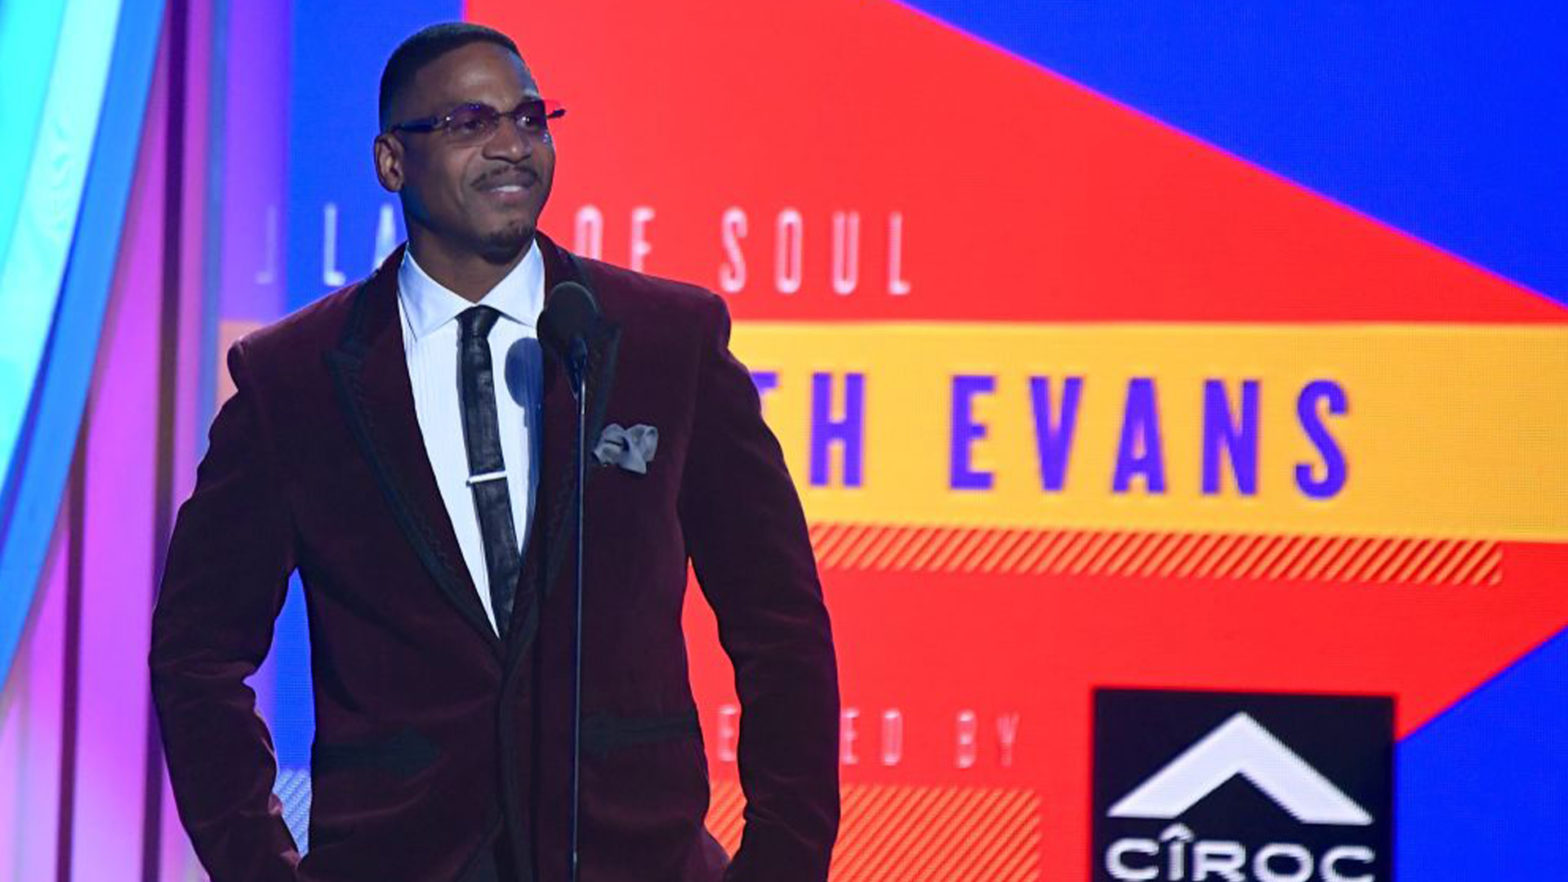 Stevie J May Be A 'Love & Hip Hop' Legend, But His $5M Net Worth Shows He's More Than His TV Persona